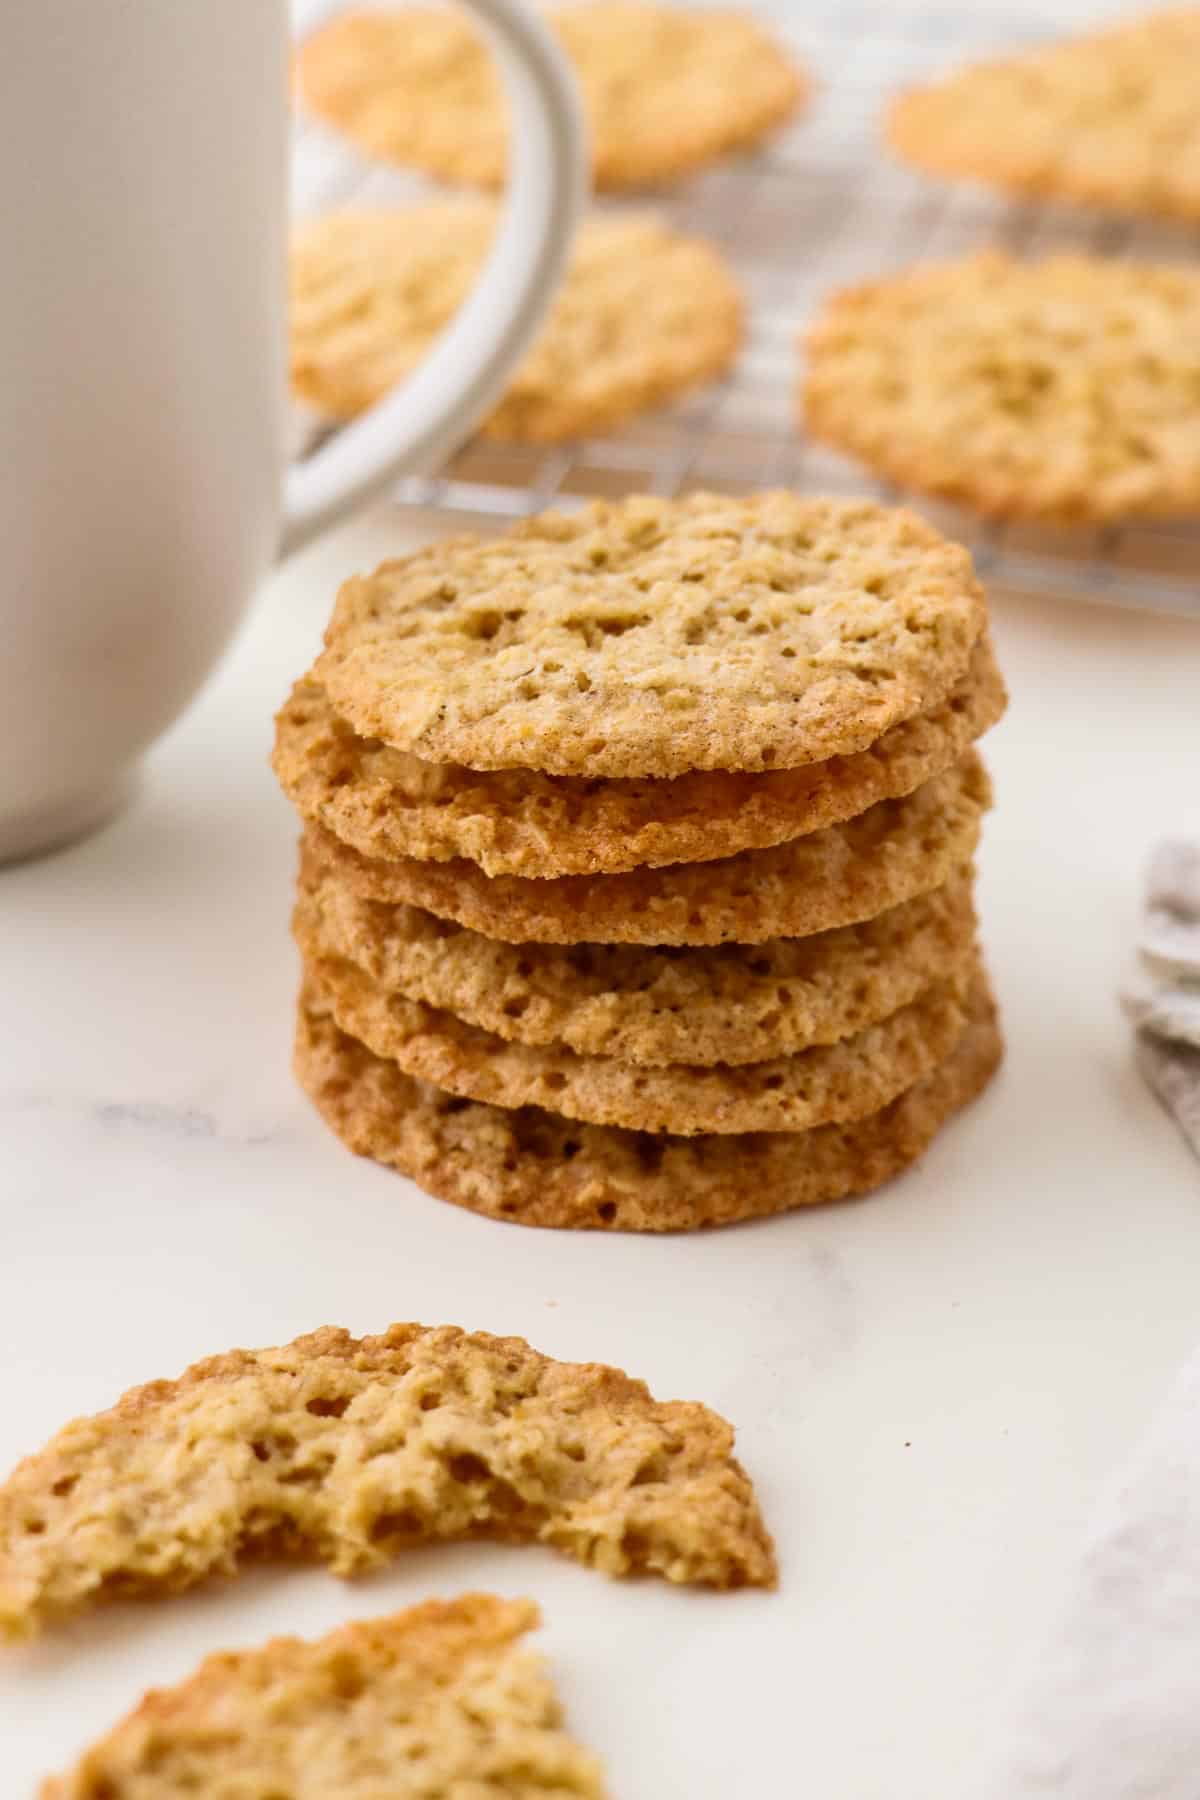 Stack of Swedish Oatmeal Cookies (Havreflarn) next to a cup of coffee.